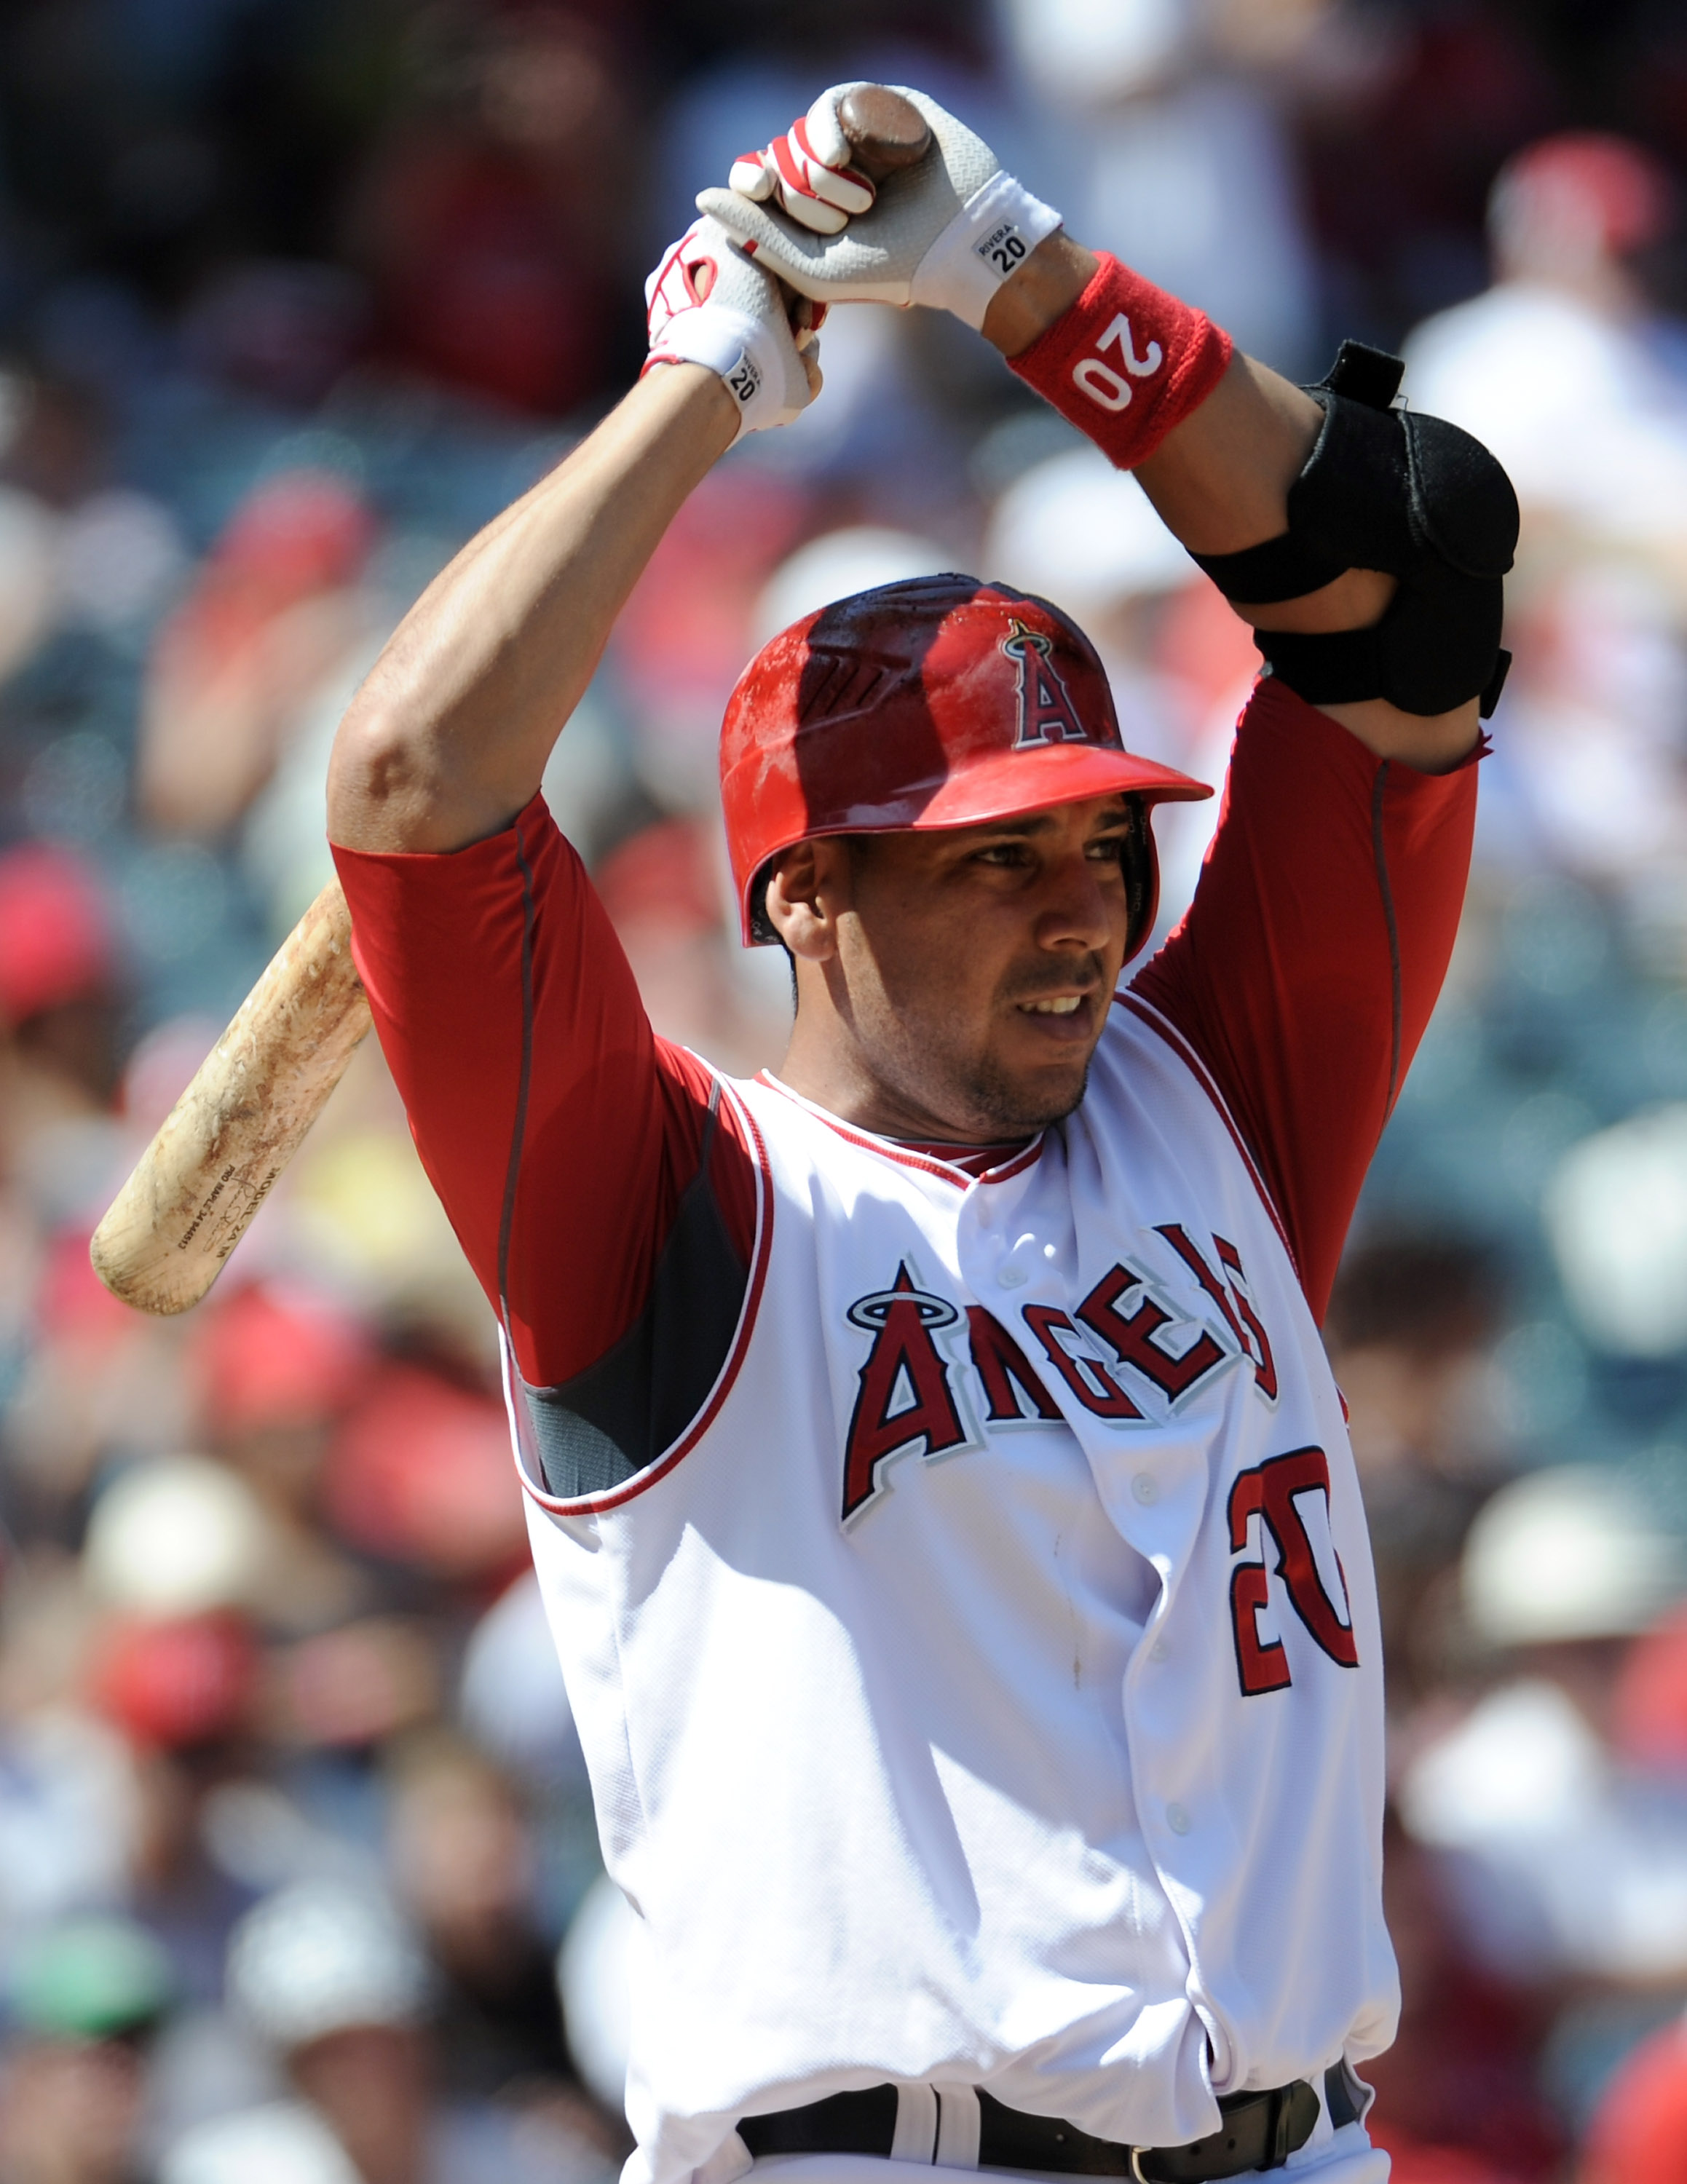 ANAHEIM, CA - SEPTEMBER 12:  Juan Rivera #20 of the Los Angeles Angels of Anaheim react to an inside pitch against the Seattle Mariners during the game at Angel Stadium on September 12, 2010 in Anaheim, California.  (Photo by Harry How/Getty Images)